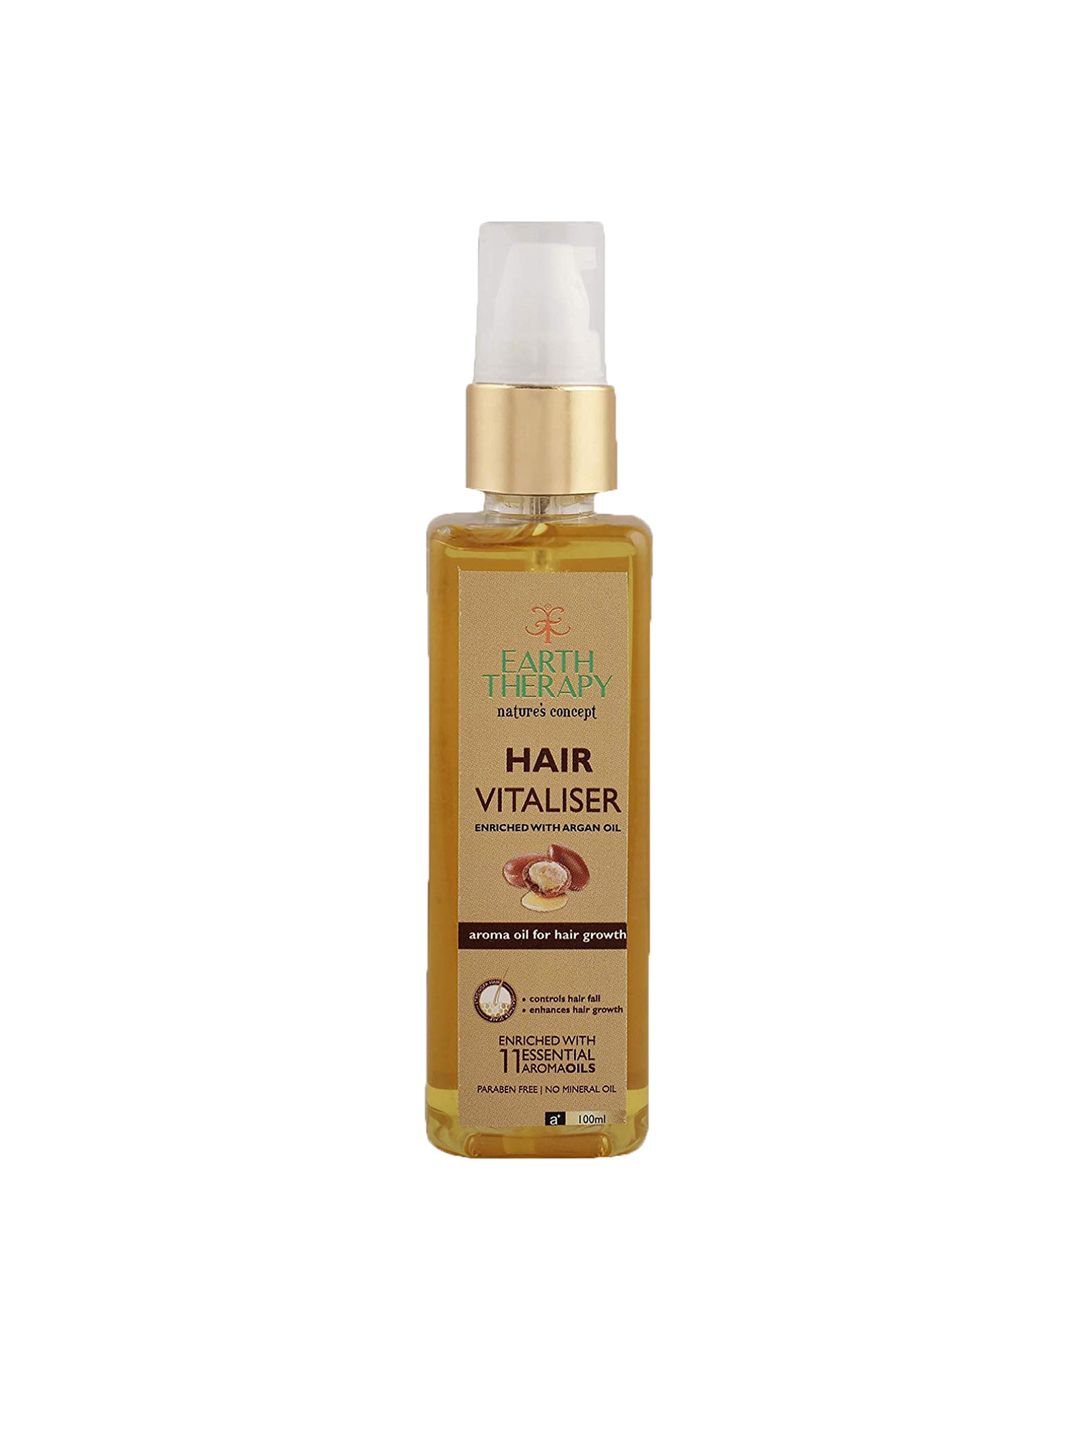 EARTH THERAPY Hair Vitaliser Oil with Argan & Ylang Ylang Oil 100 ml Price in India